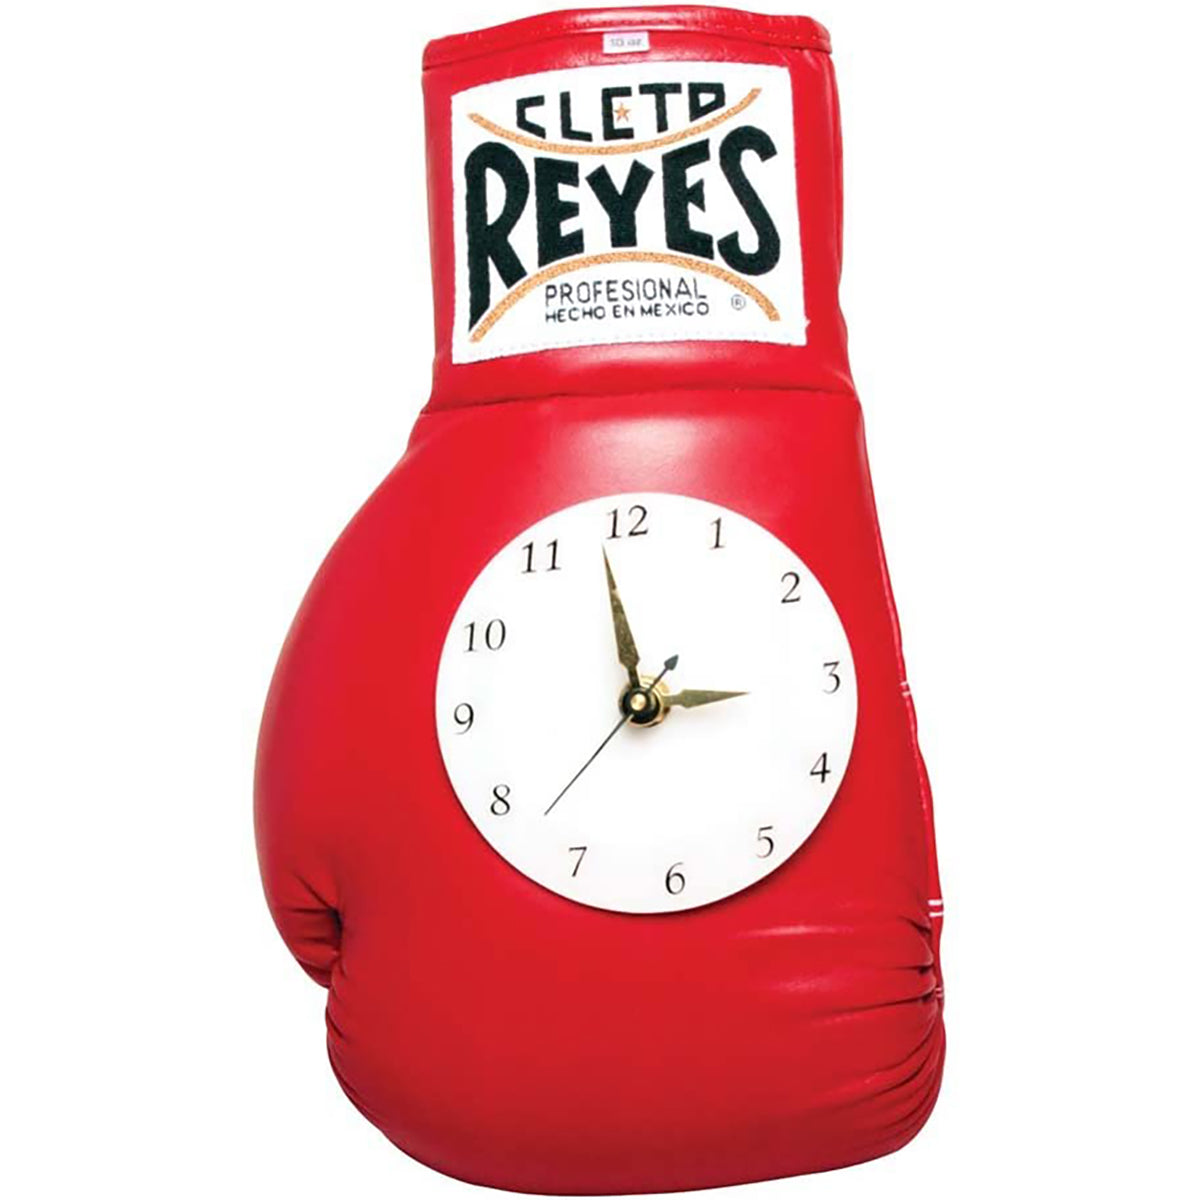 Cleto Reyes 10 oz Authentic Pro Fight Leather Clock Glove - Red Cleto Reyes